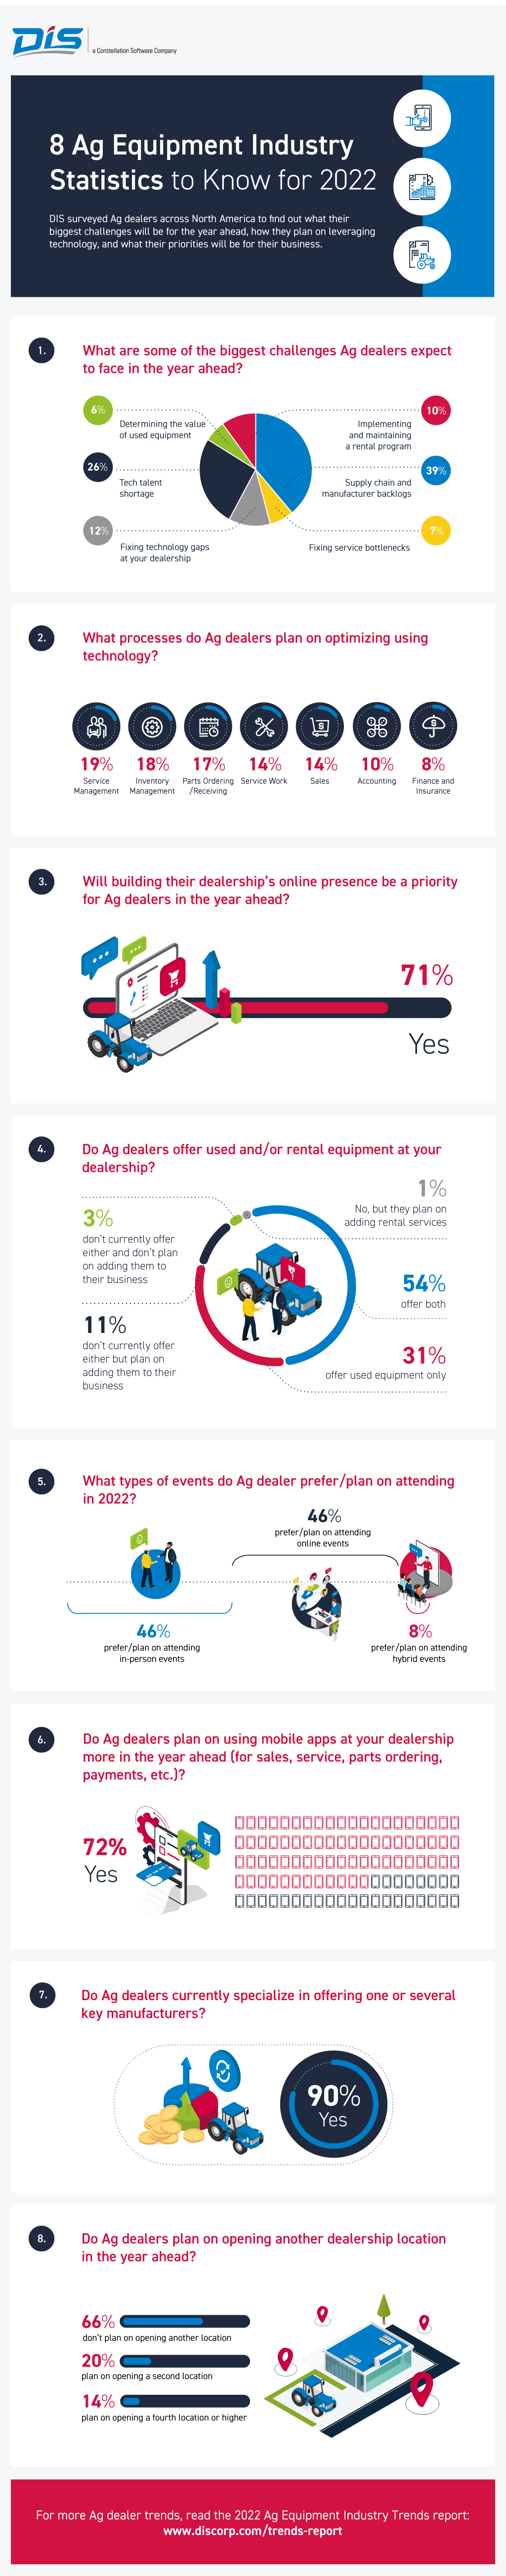 DIS Agriculture Equipment Industry Statistics Infographic